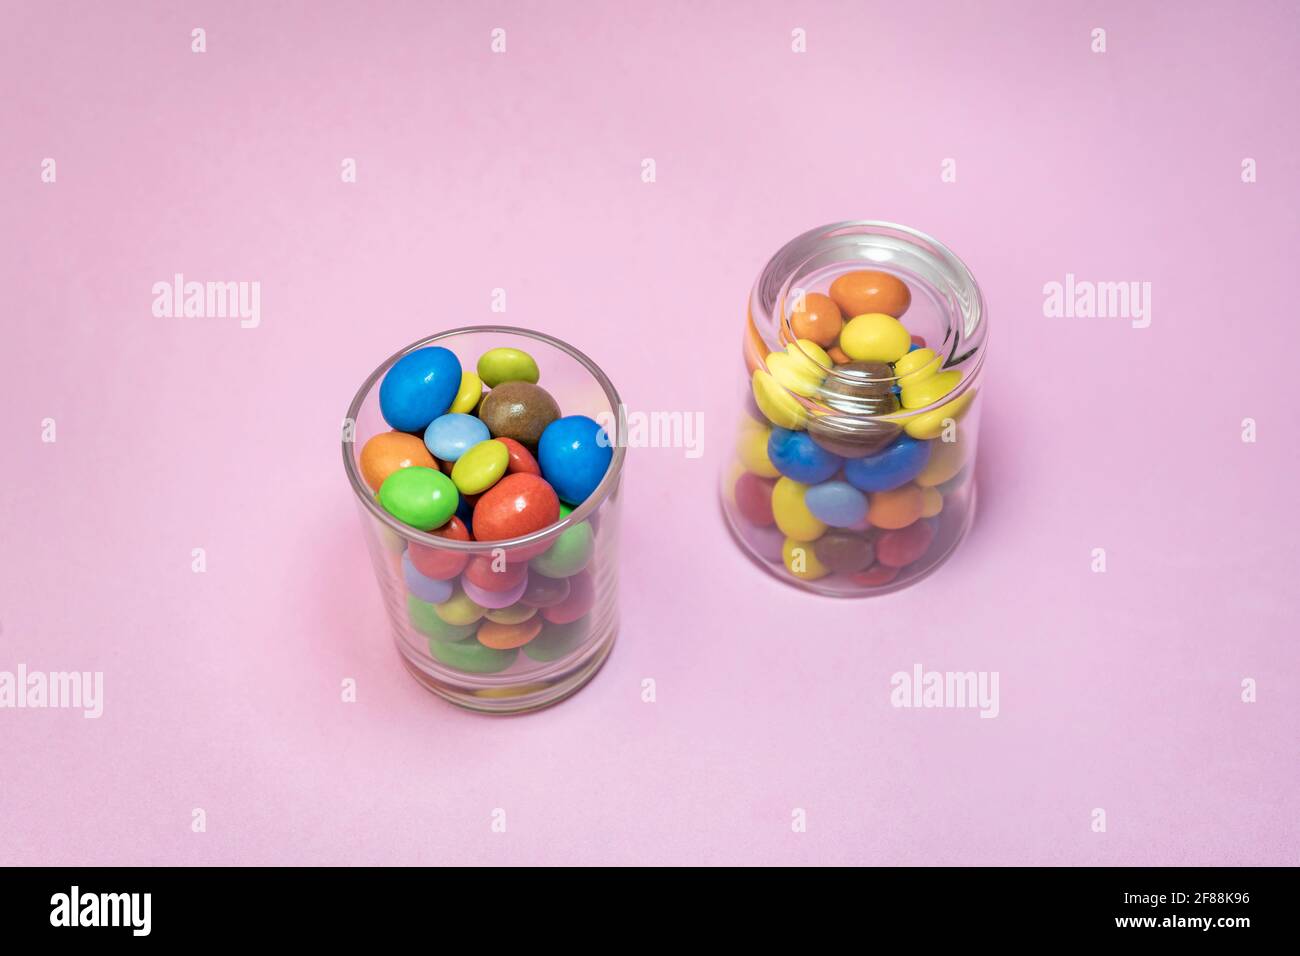 Multicolored chocolate candies in two glass on pink background.Closeup view of creative colorful sweets background concept with copy space for text. Stock Photo